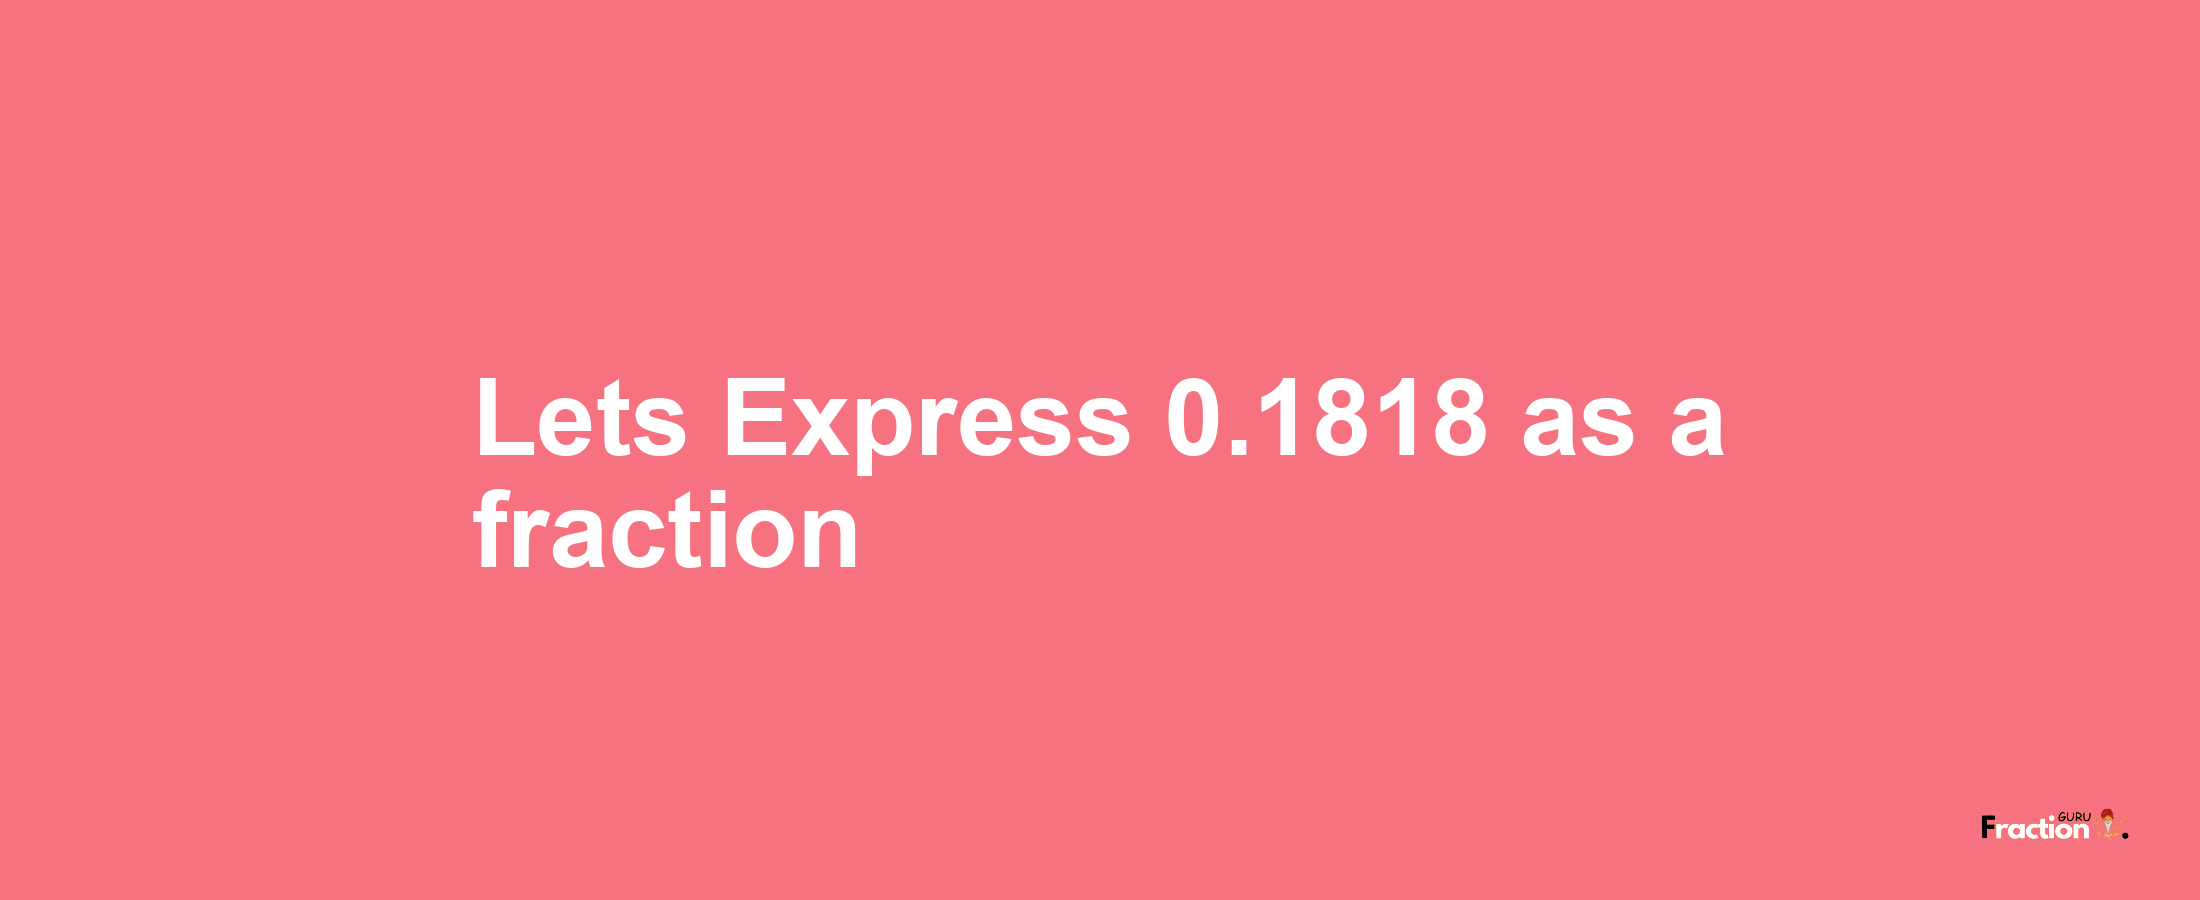 Lets Express 0.1818 as afraction